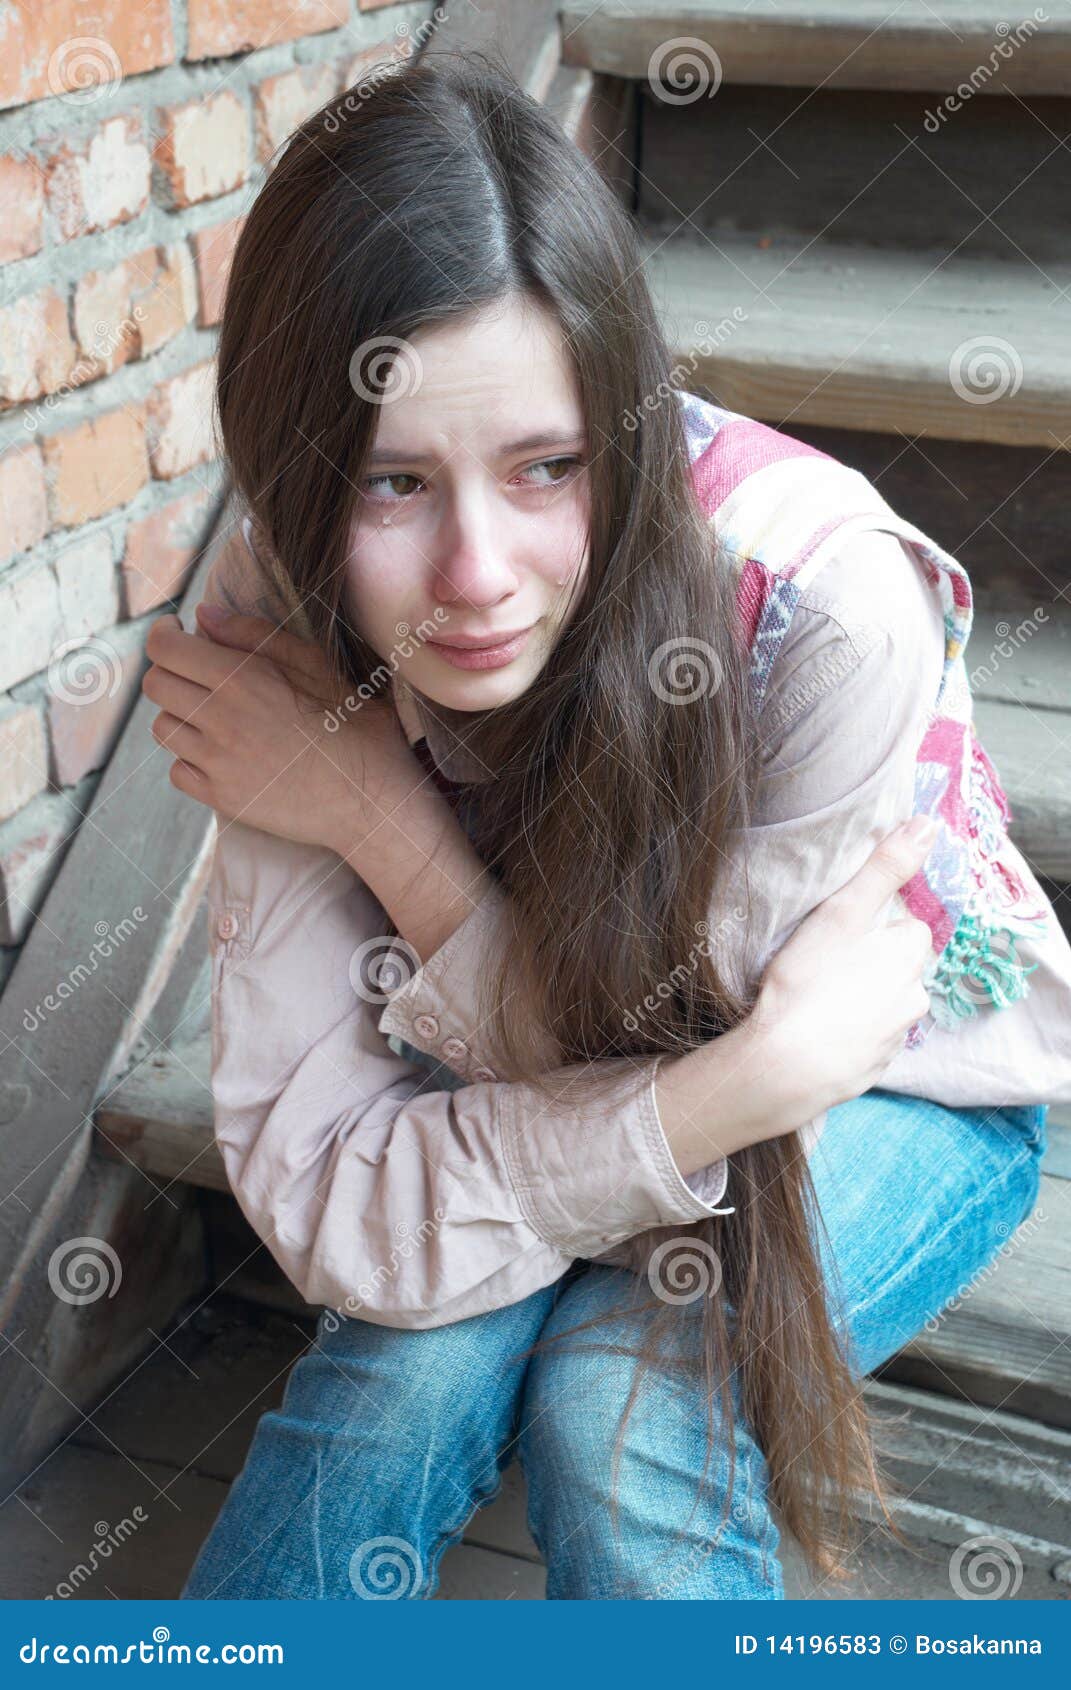 Crying girl on stairs stock image. Image of female, fear - 14196583